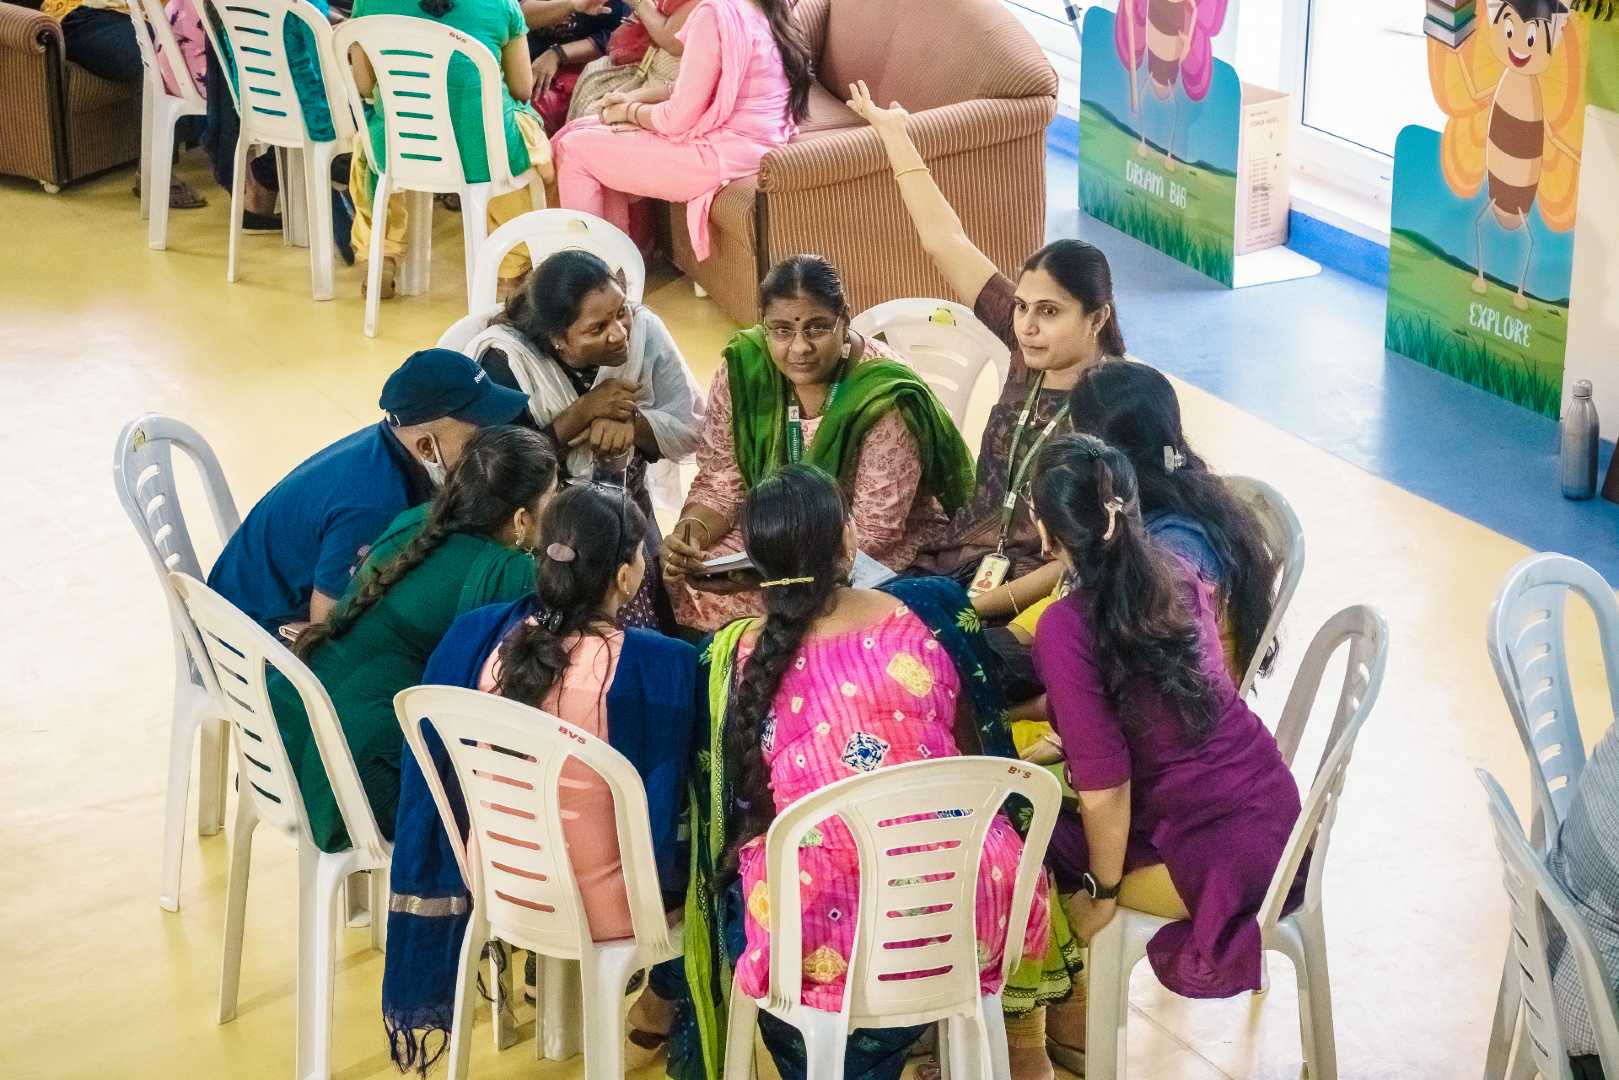 A group of teachers sitting on chairs and discussing on how to improve students' talents in the school.